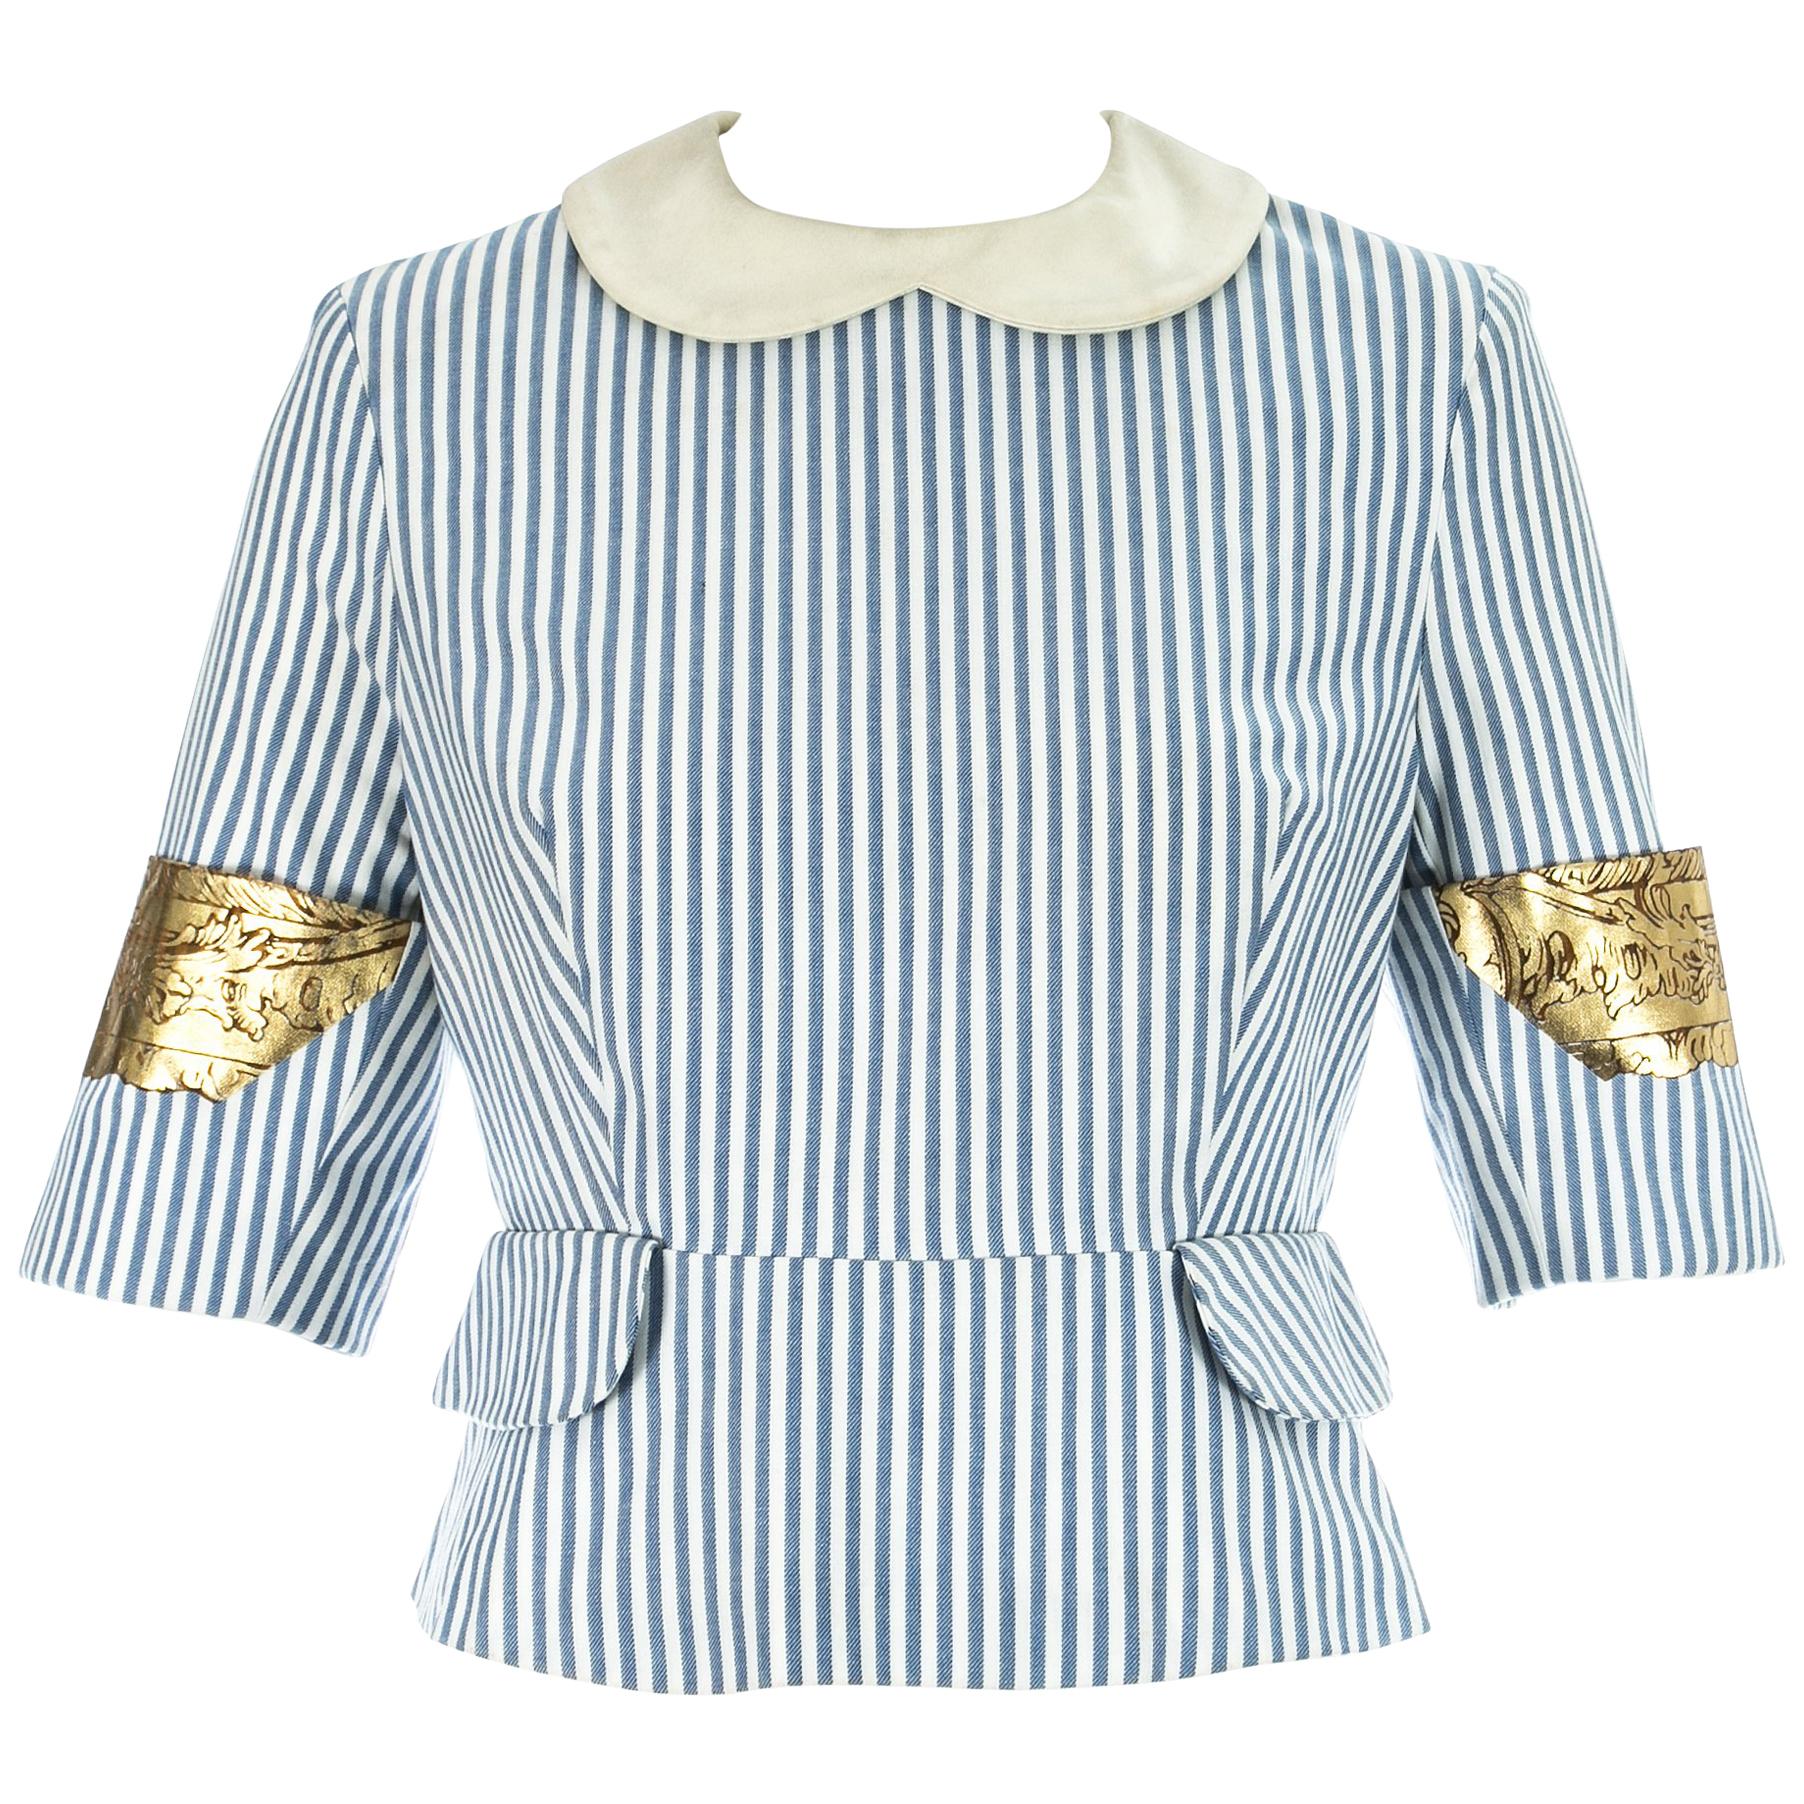 Vivienne Westwood blue and white striped back to front blouse, ss 1989